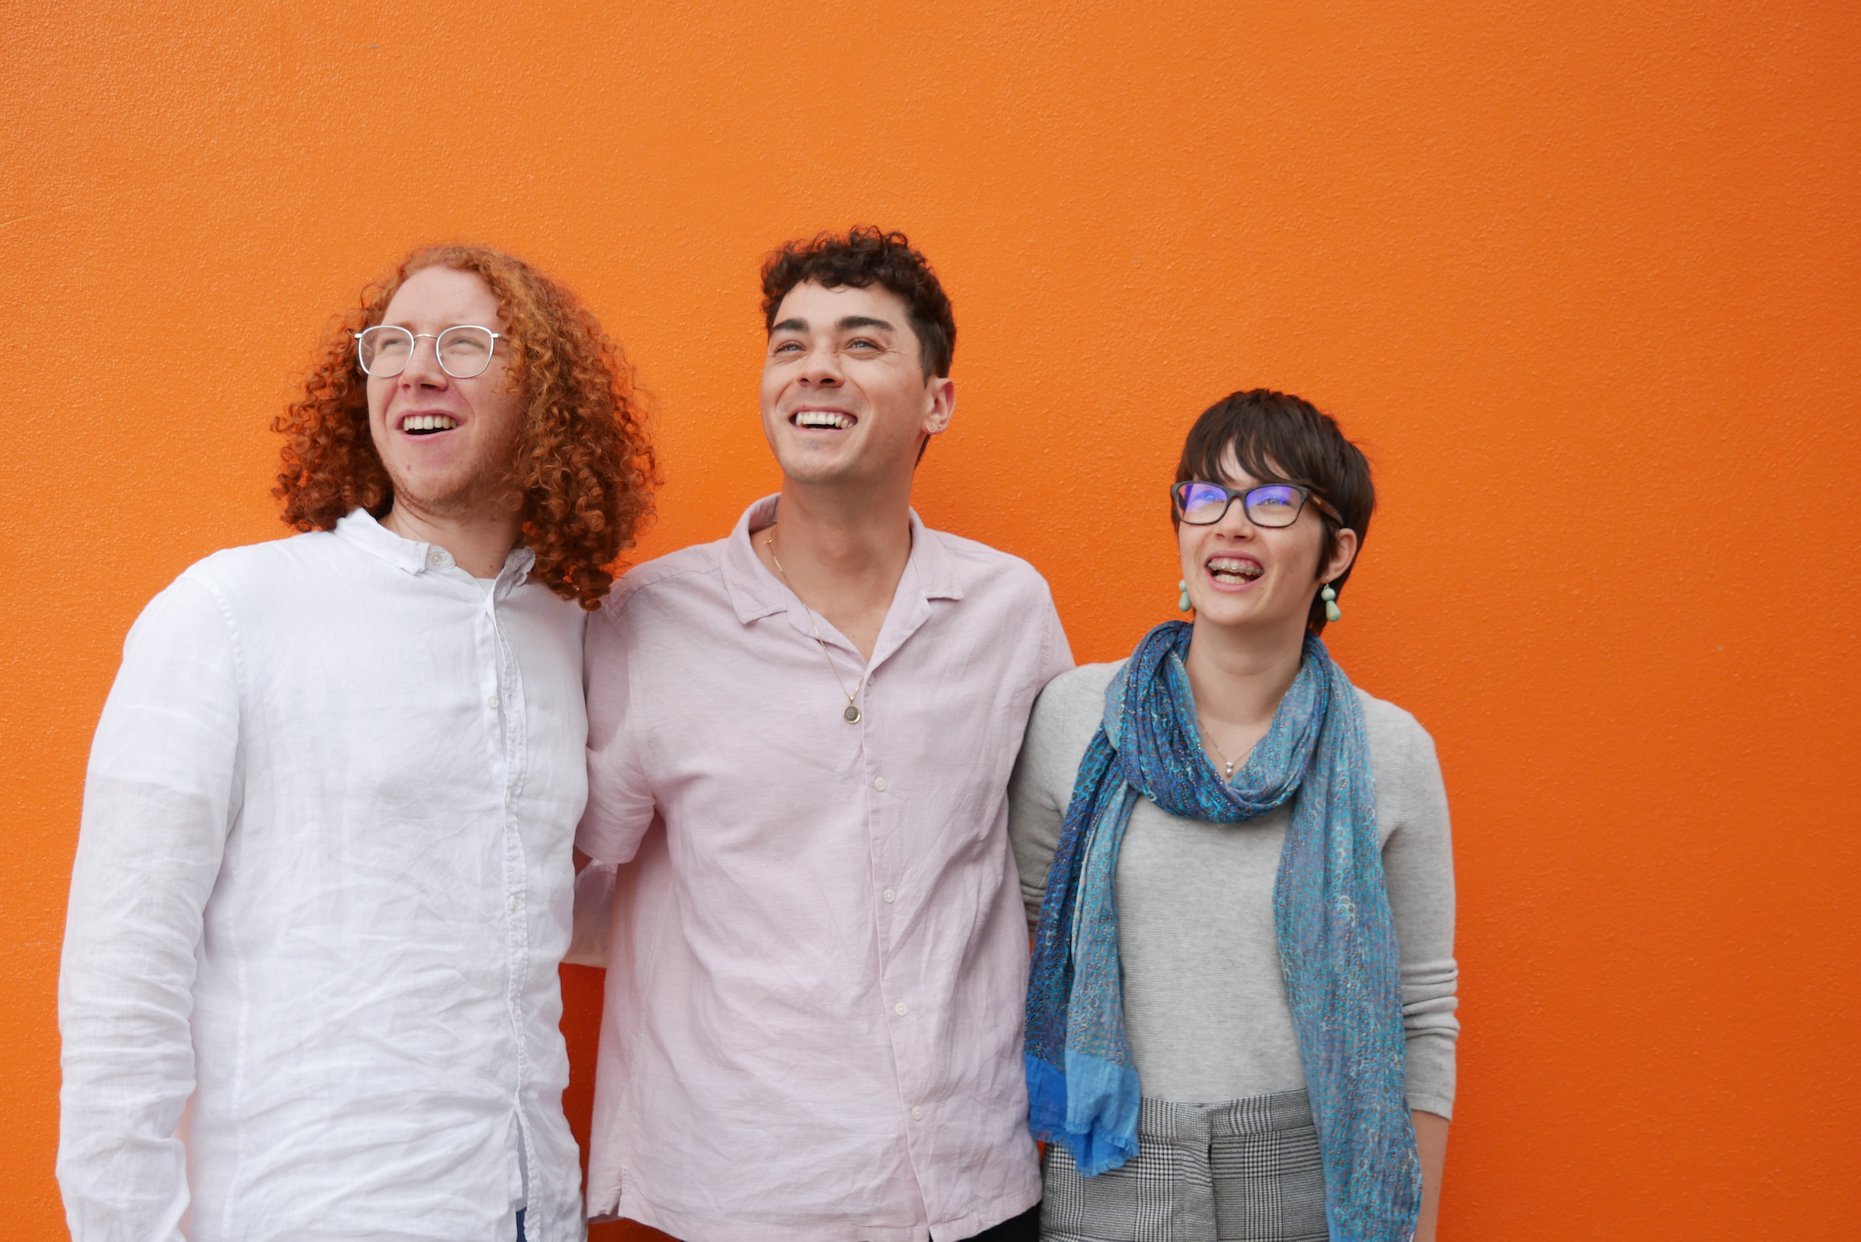 A photograph of three people embracing and smiling. They are all looking past the camera at something to the left. They stand in front of a bright orange wall. The peopple are: Chris Leopardi, Jay Anderson, and Luisa Mitchell